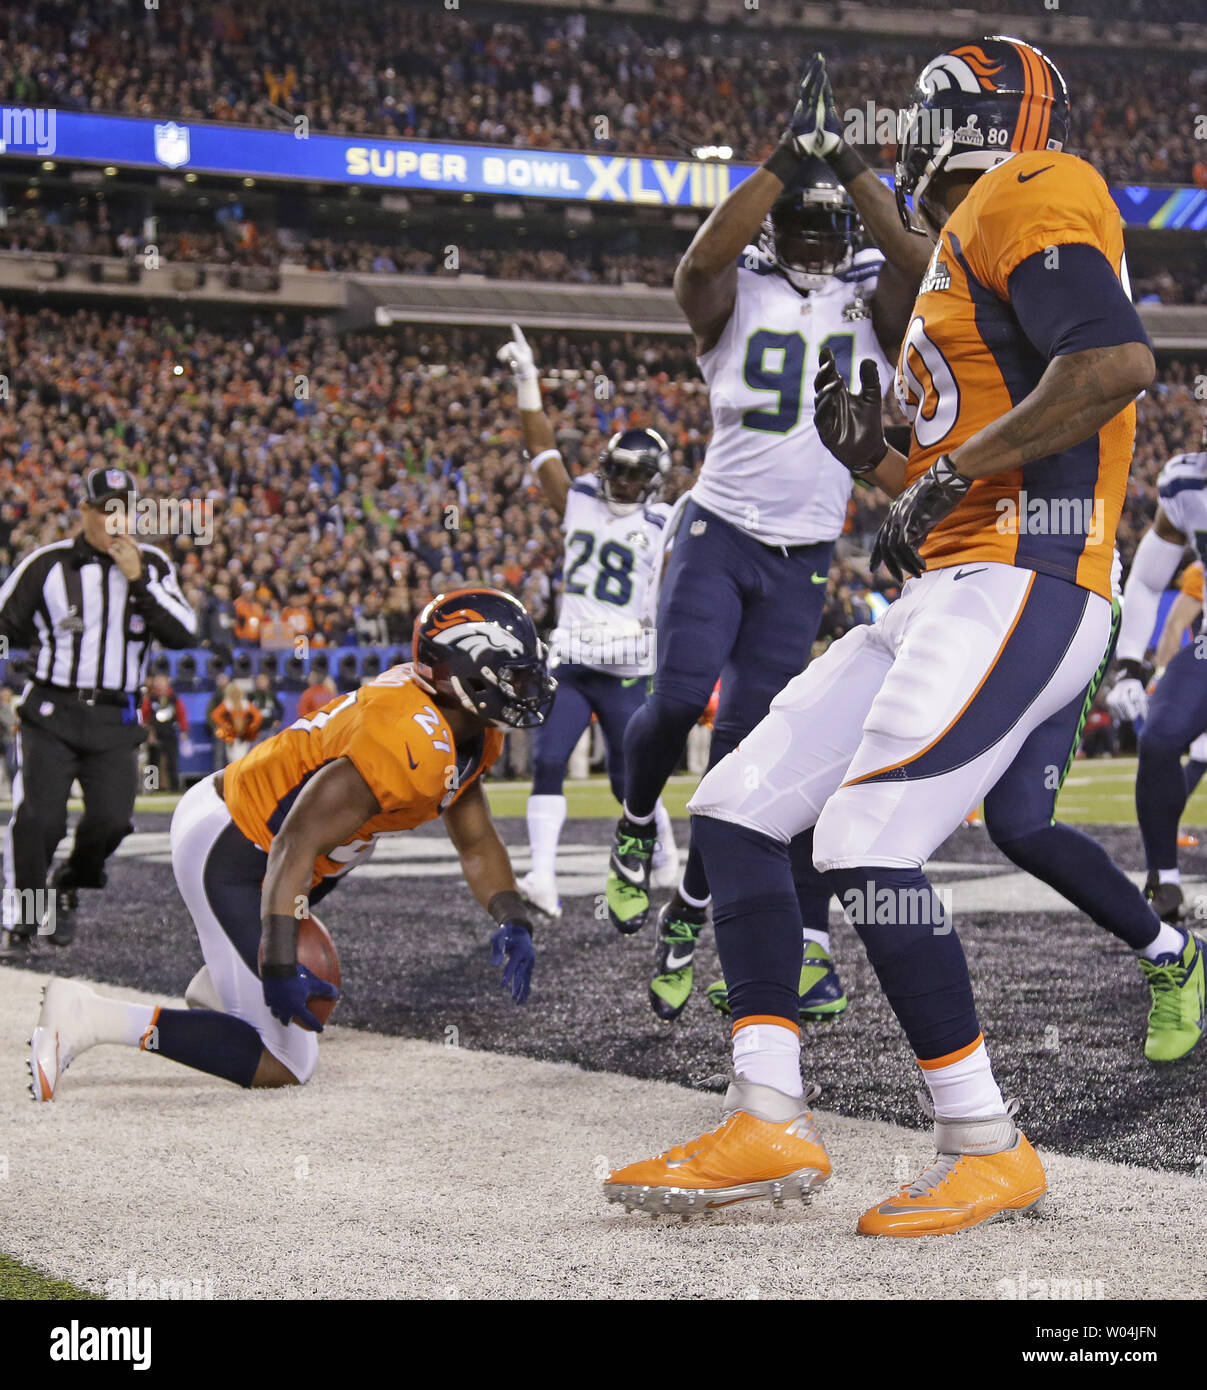 The Seattle Seahawks celebrate scoring a safety against the Denver